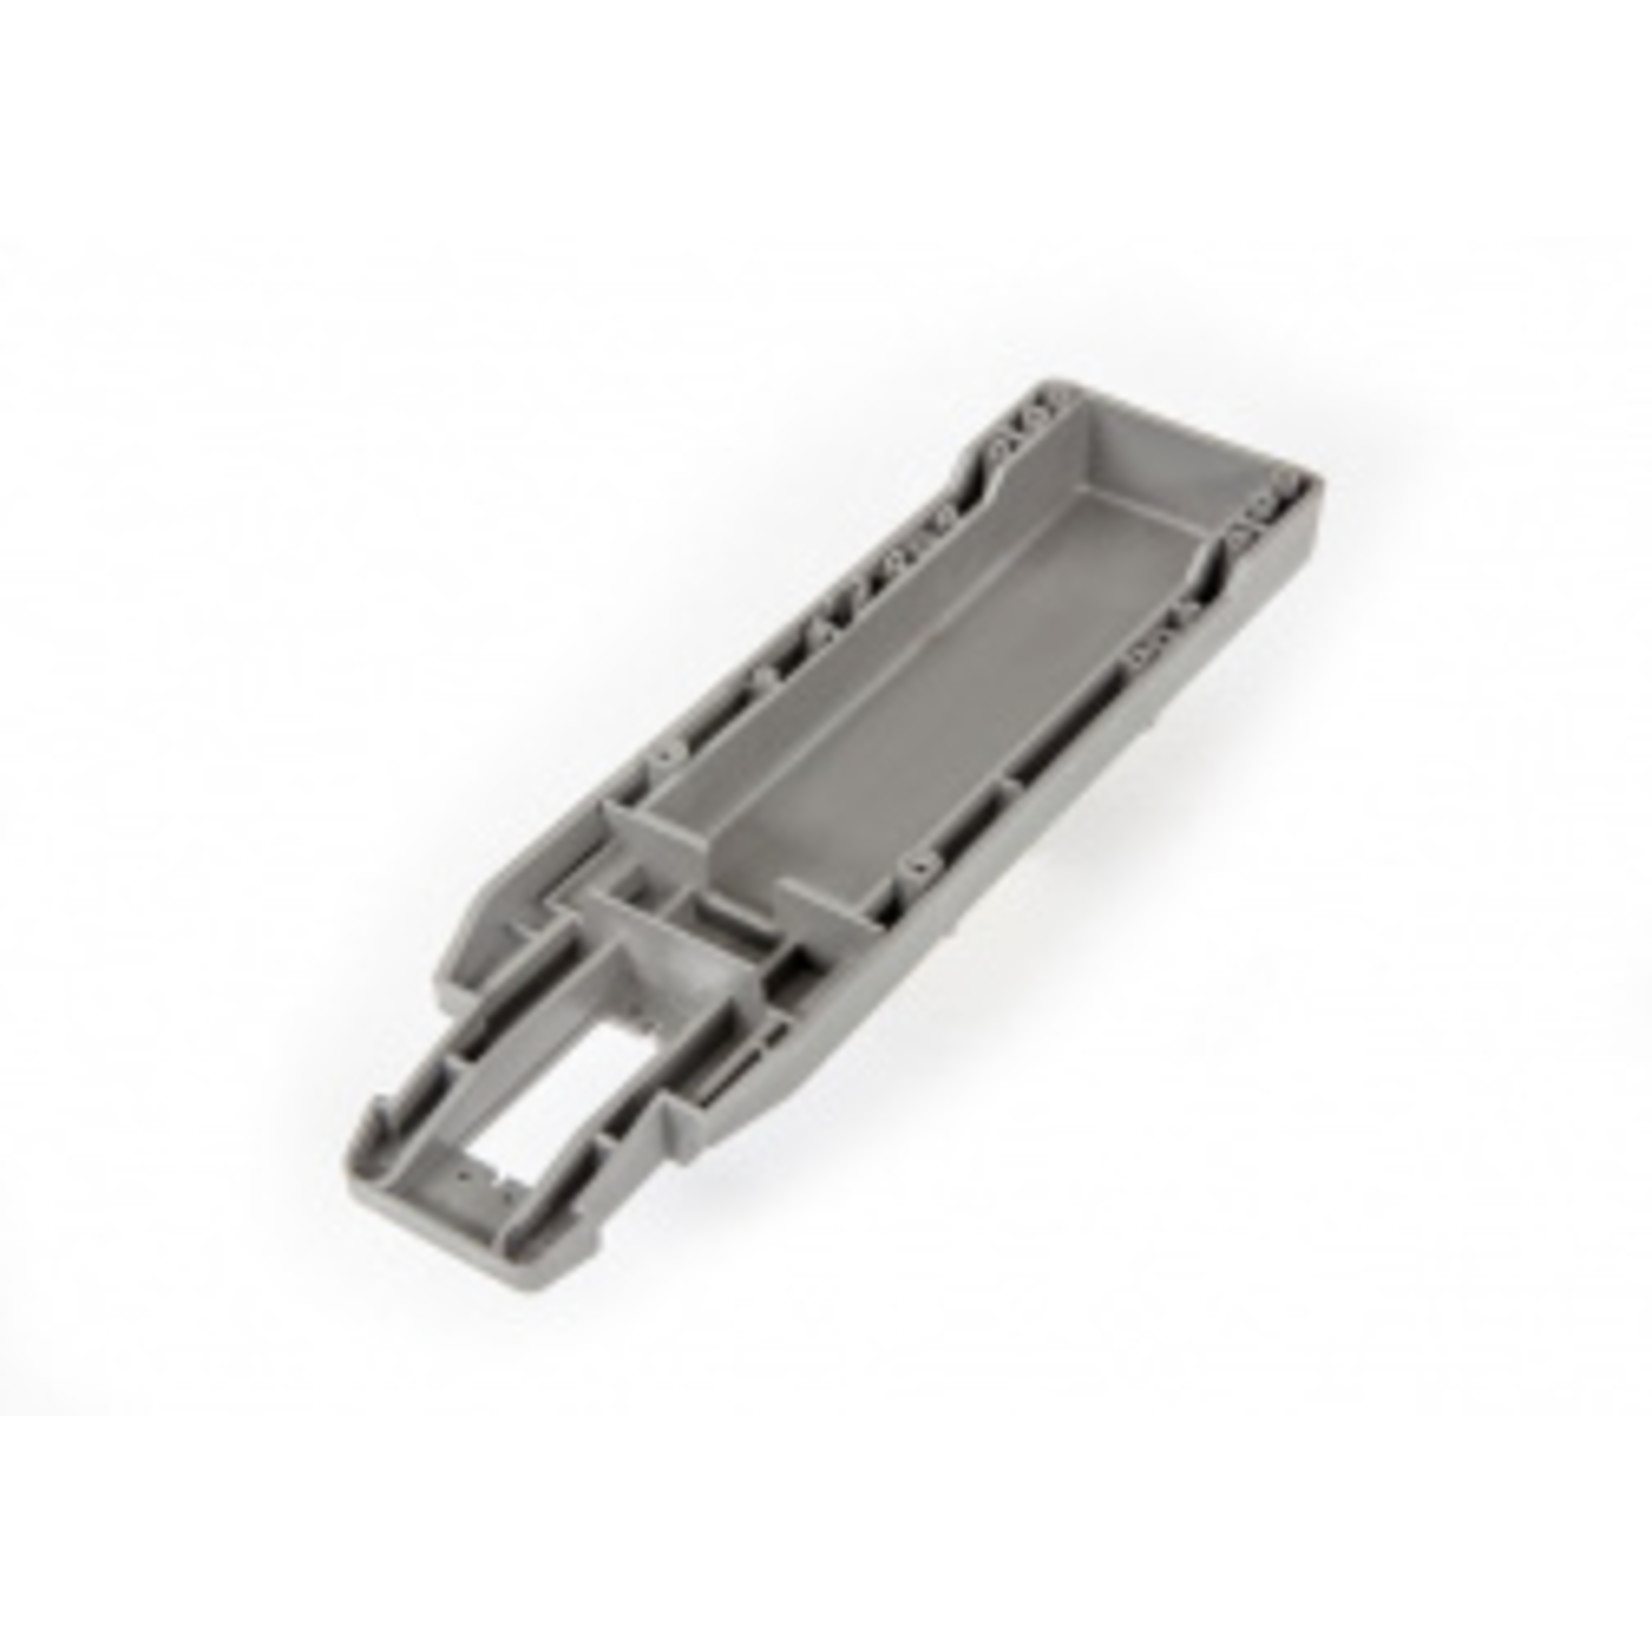 Traxxas Main chassis (gray) (164mm long battery compartment) (fits both flat and hump style battery packs) (use only with #3626R ESC mounting plate)